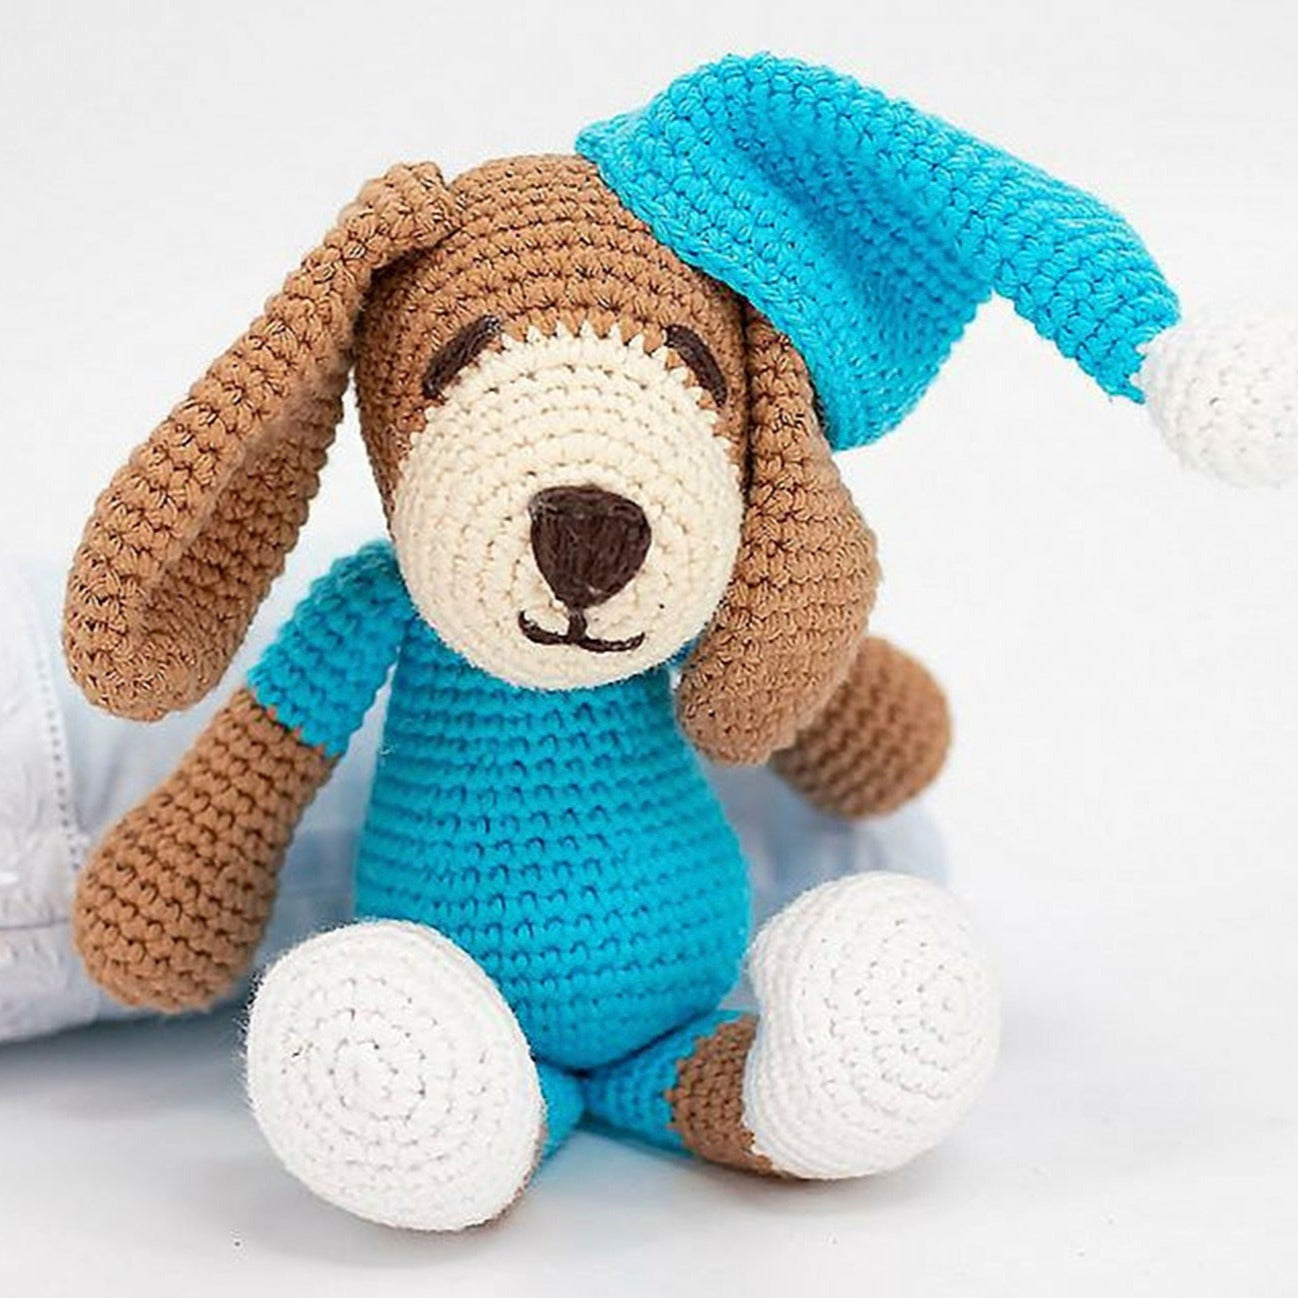 Crafted with precision using 100% organic hypoallergenic cotton, the Blue Doggie Crochet Toy is an ideal baby gift.